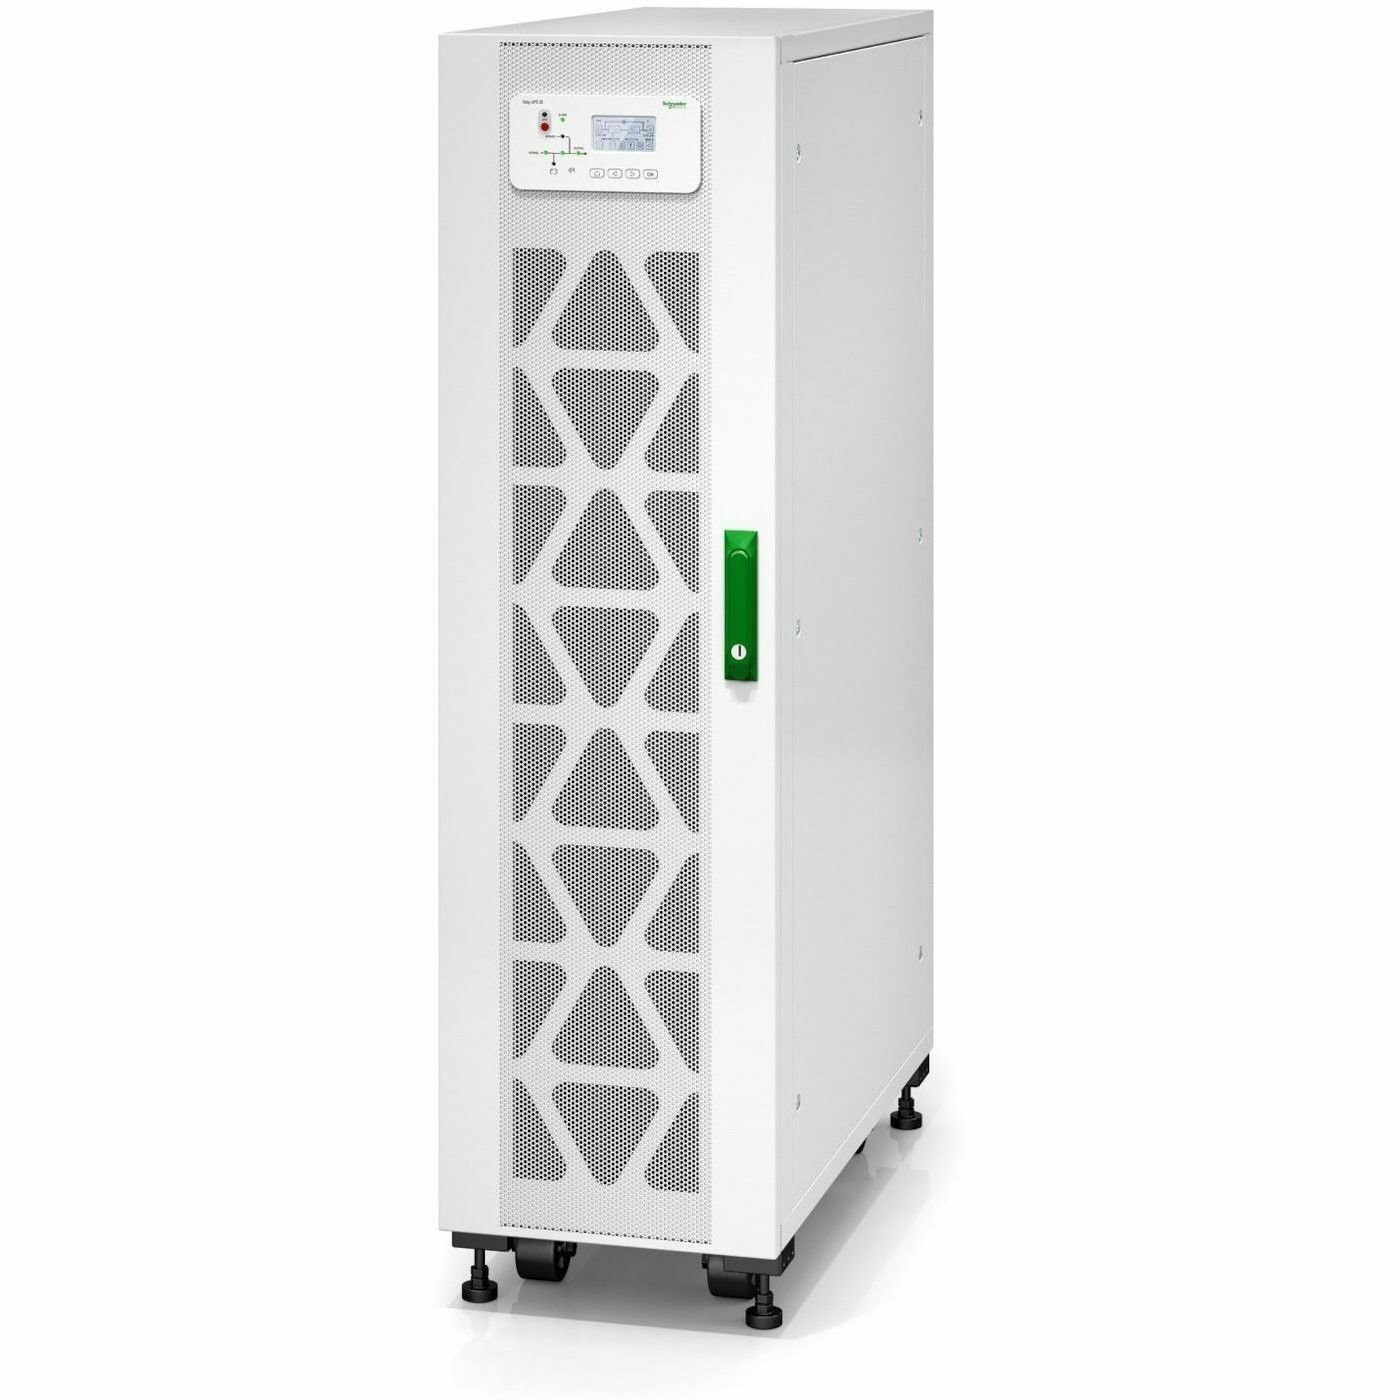 APC by Schneider Electric Easy UPS 3S Double Conversion Online UPS - 20 kVA/20 kW - Three Phase